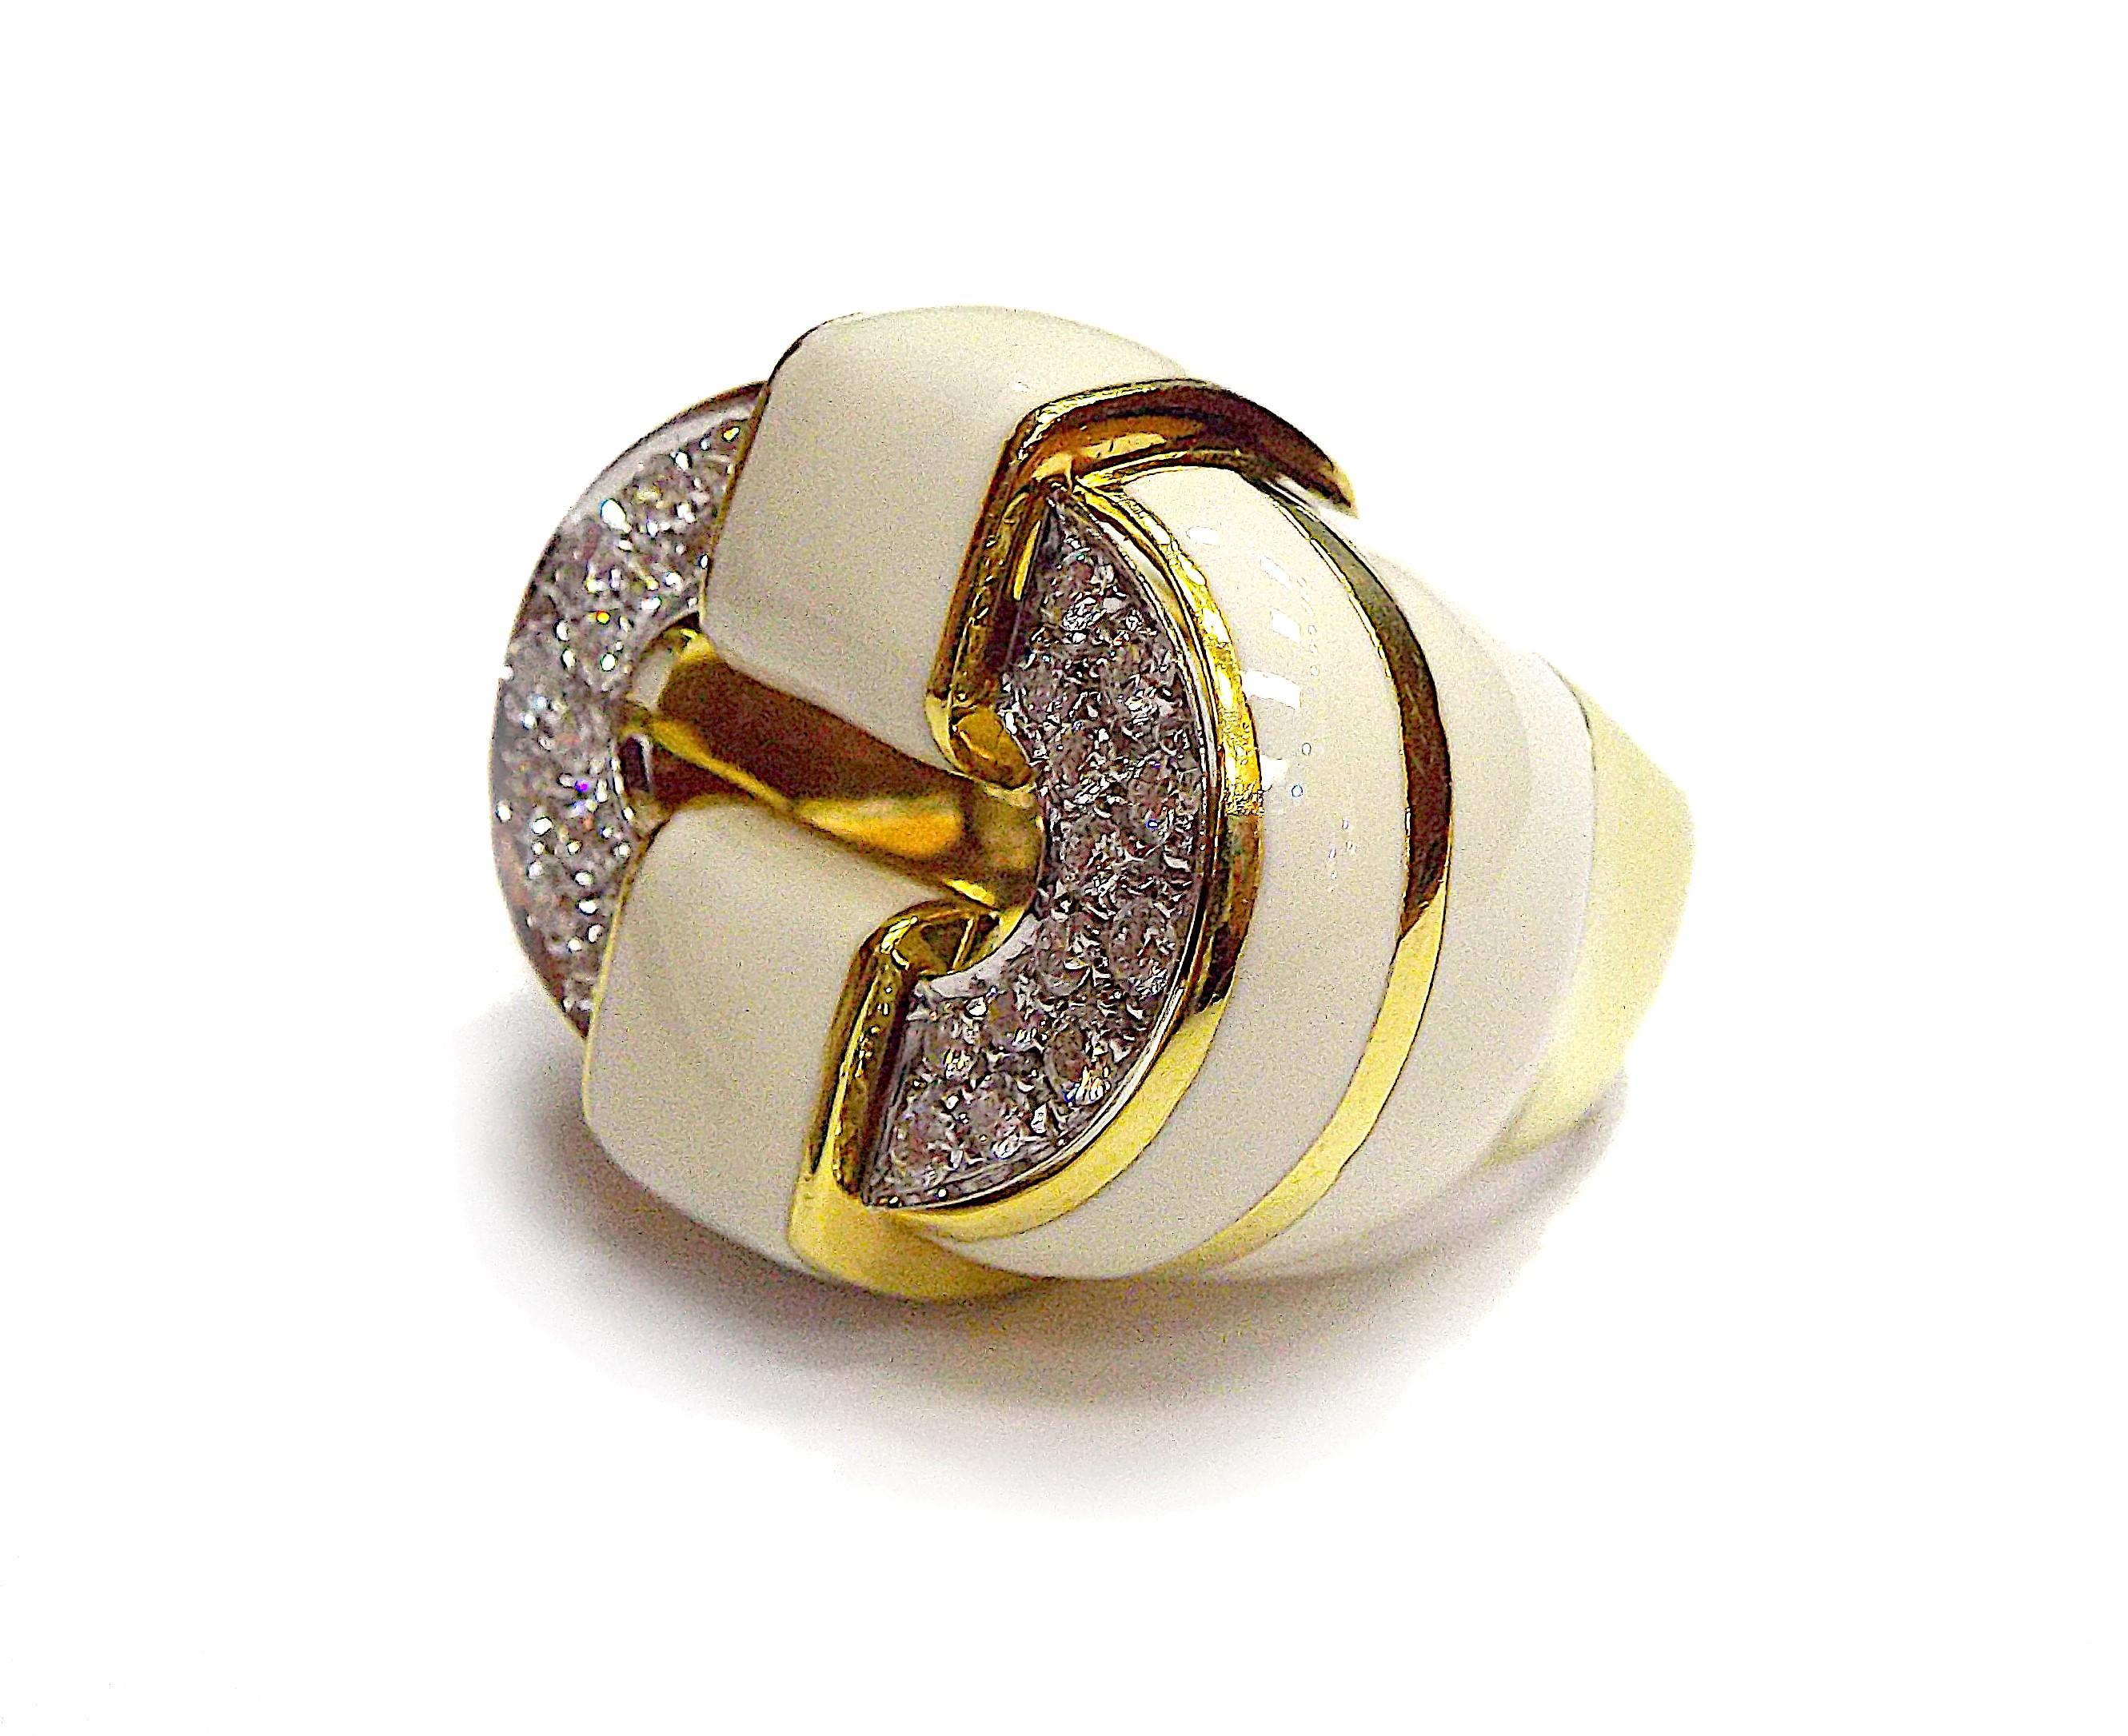 A stylish ring by David Webb performed in 18K yellow gold and white enamel, featuring approx. 1.56ct of diamonds. The ring size is 6.75, weight is 23.8 grams, top dimensions are 2.3cm x 2.8cm. Signed Webb, marked 18K.